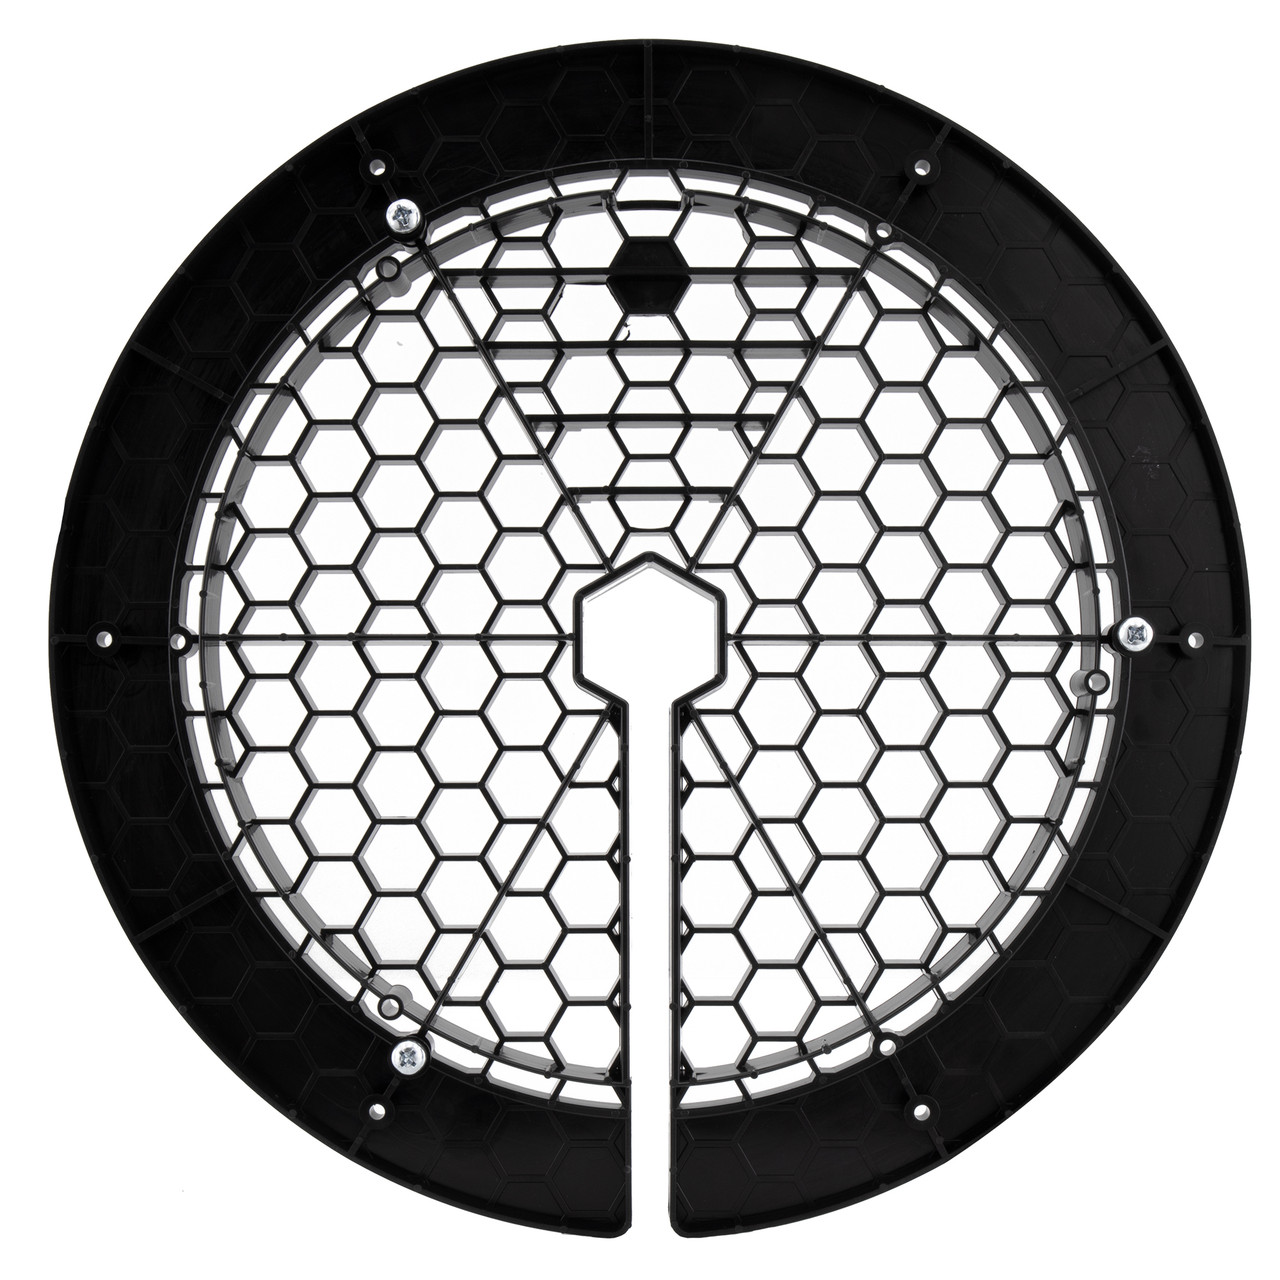 Ice Fishing Ice Hole Mesh Safety Cover Lid - RecPro